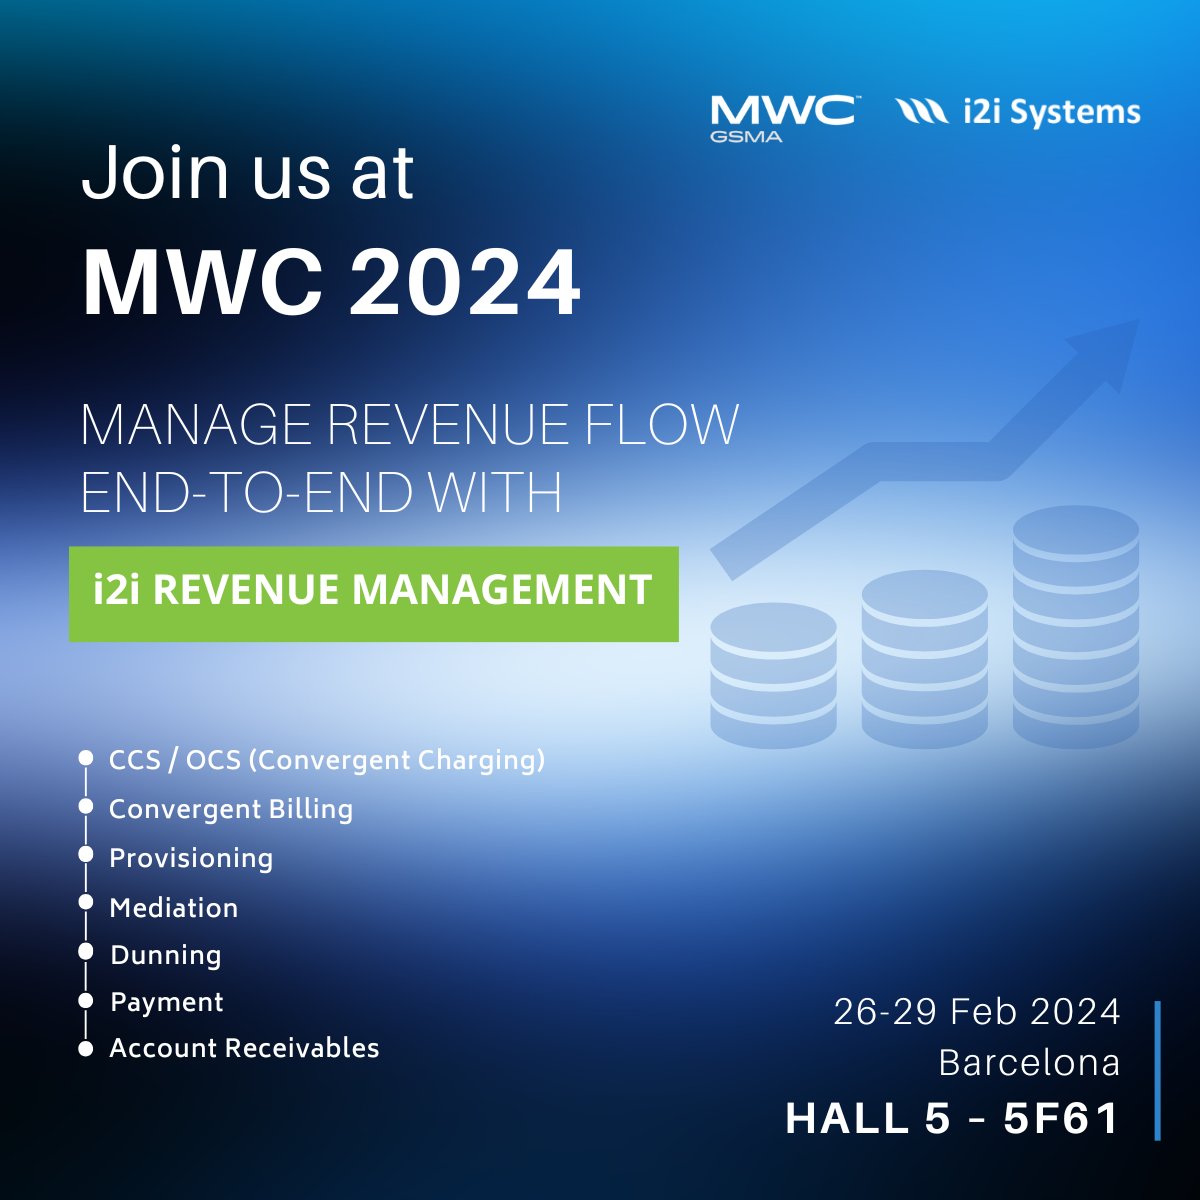 Join us at #MWC24 to discover our i2i Revenue Management Suite!

i2i #RevenueManagement Suite provides operators with the ability to manage their revenue flow end-to-end. 

@MWCHub